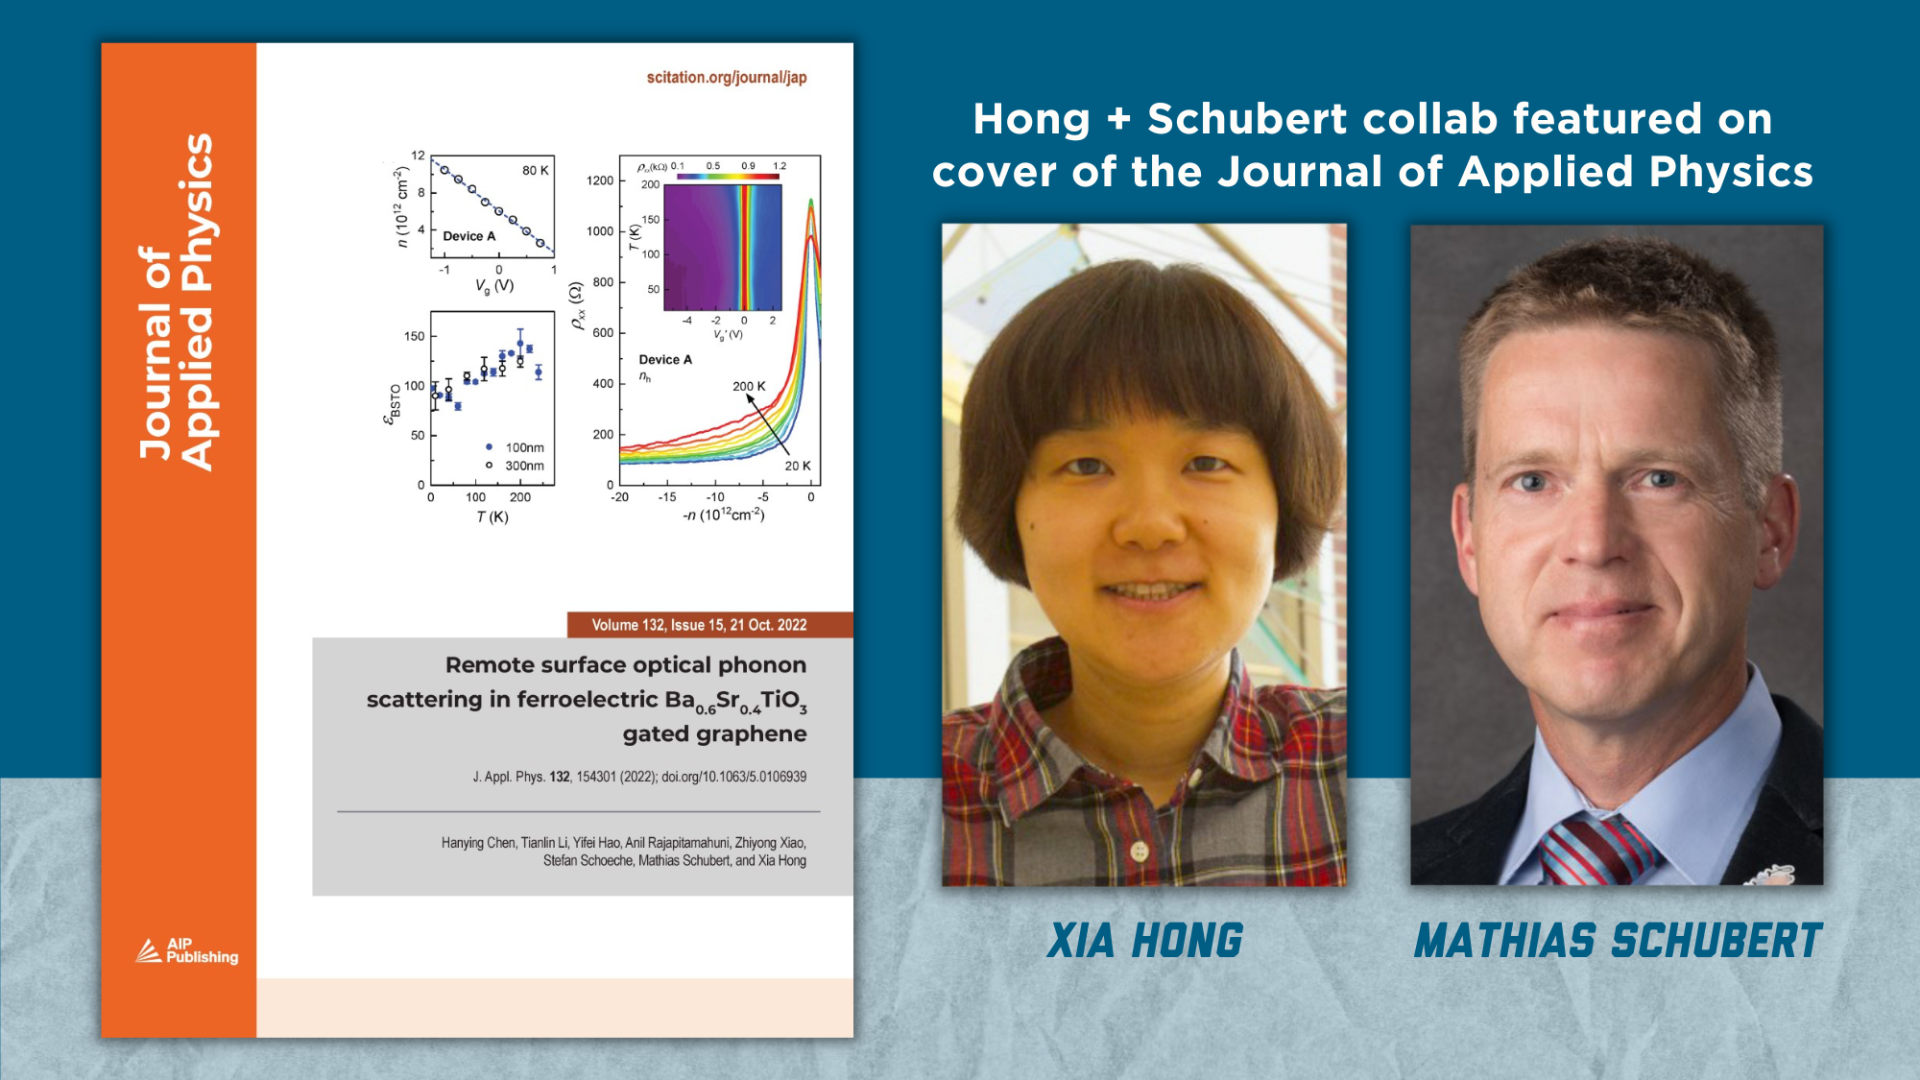 Cover of the October 2022 edition of the Journal of Applied Physics accompanied by photos of Xia Hong and Mathias Schubert.